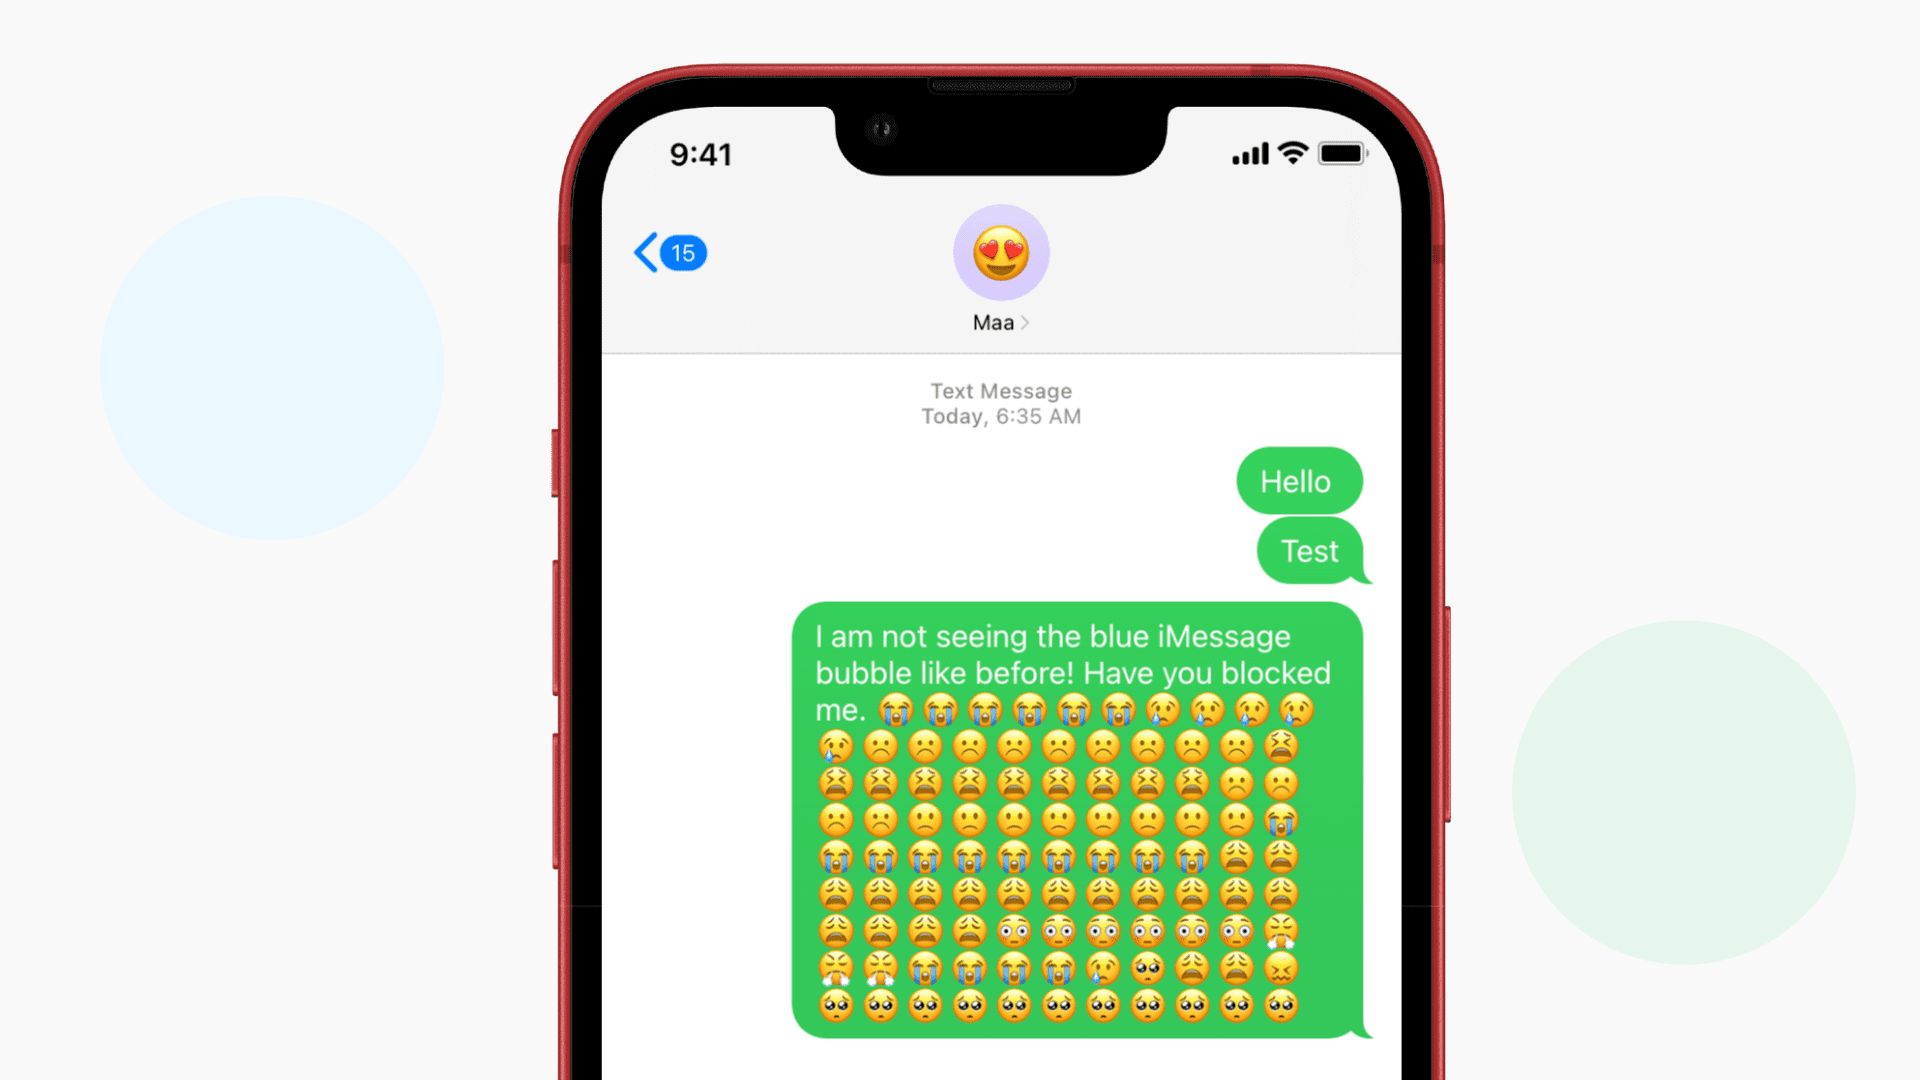 iOS 16: How to unsend an iMessage?